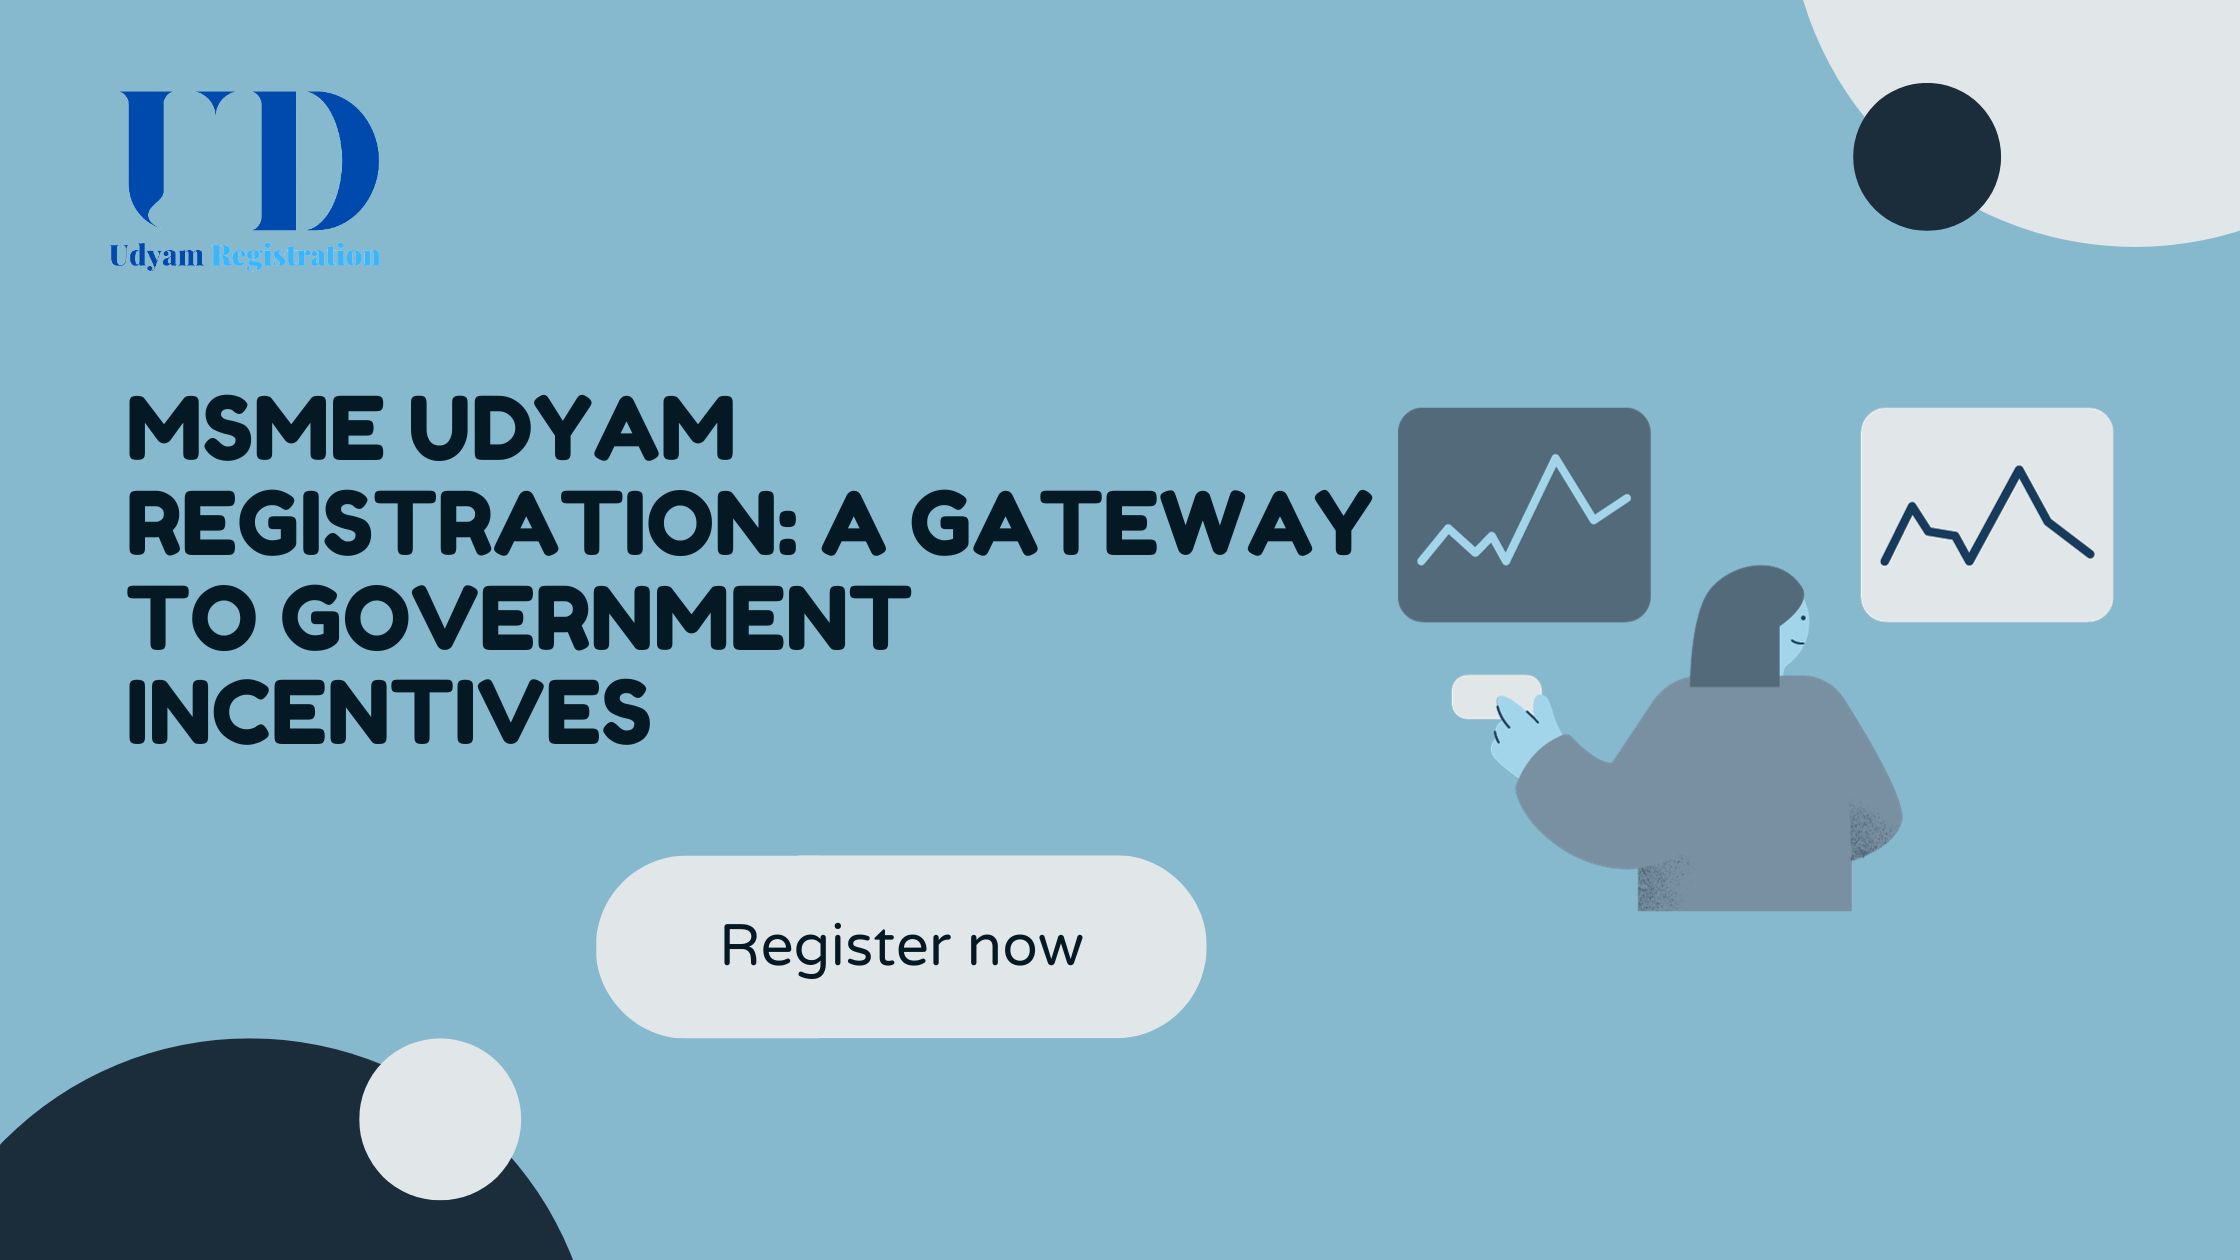 MSME Udyam Registration: A Gateway to Government Incentives